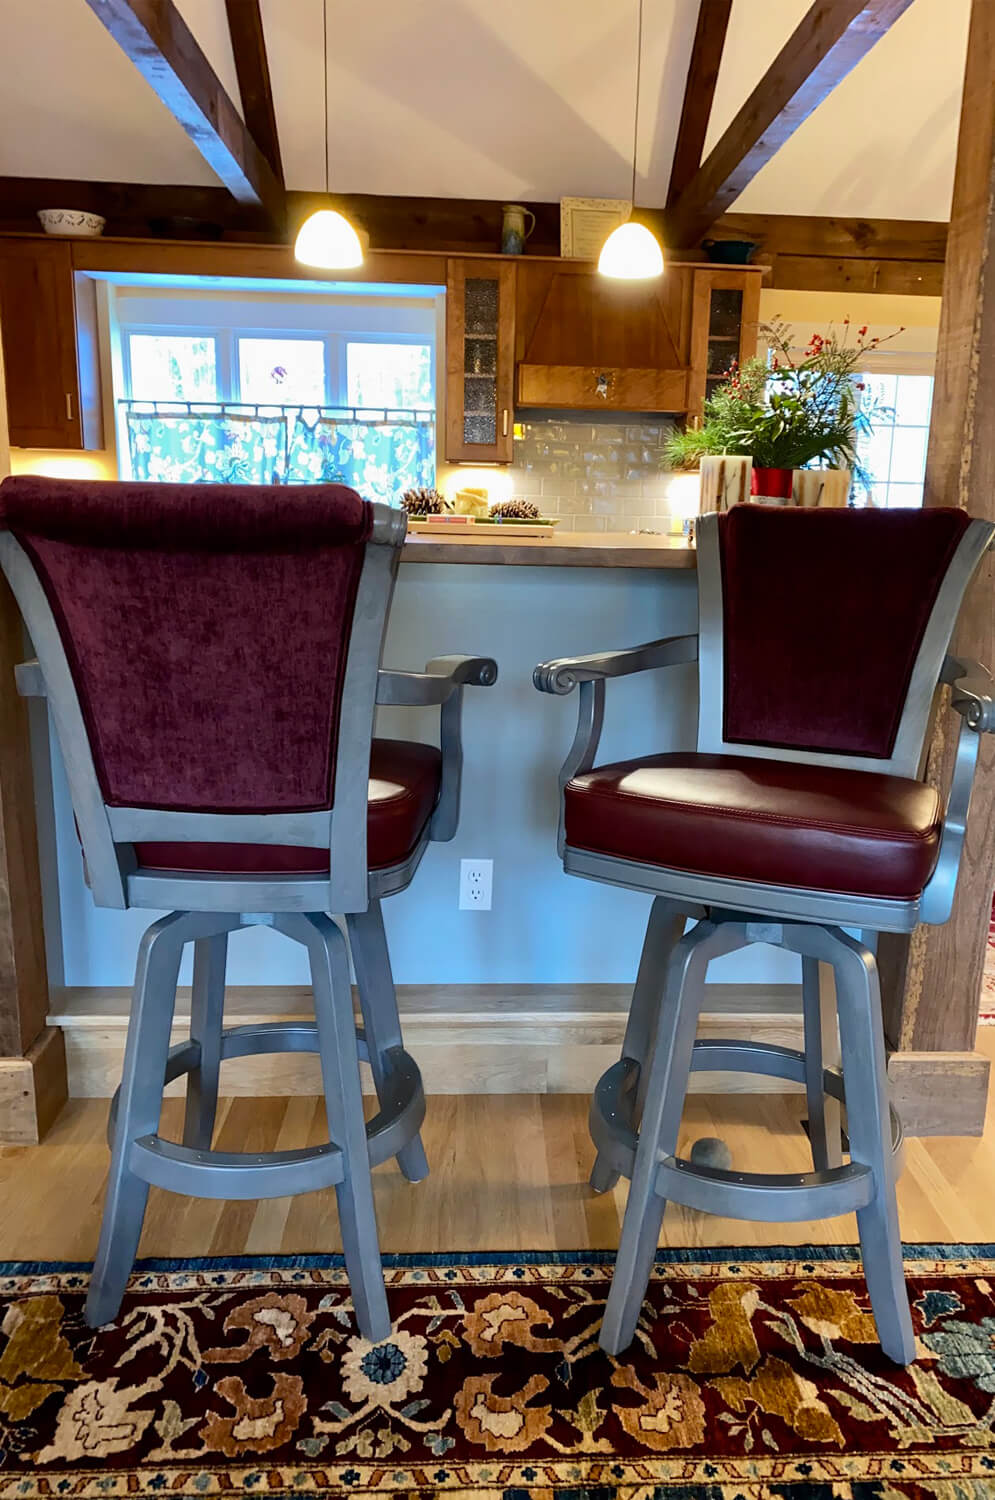 https://barstoolcomforts.com/wp-content/uploads/2020/01/darafeev_classic-maple-swivel-bar-stools-with-arms-in-gray-wood-finish-and-burgandy-seat-back-cushion.jpg